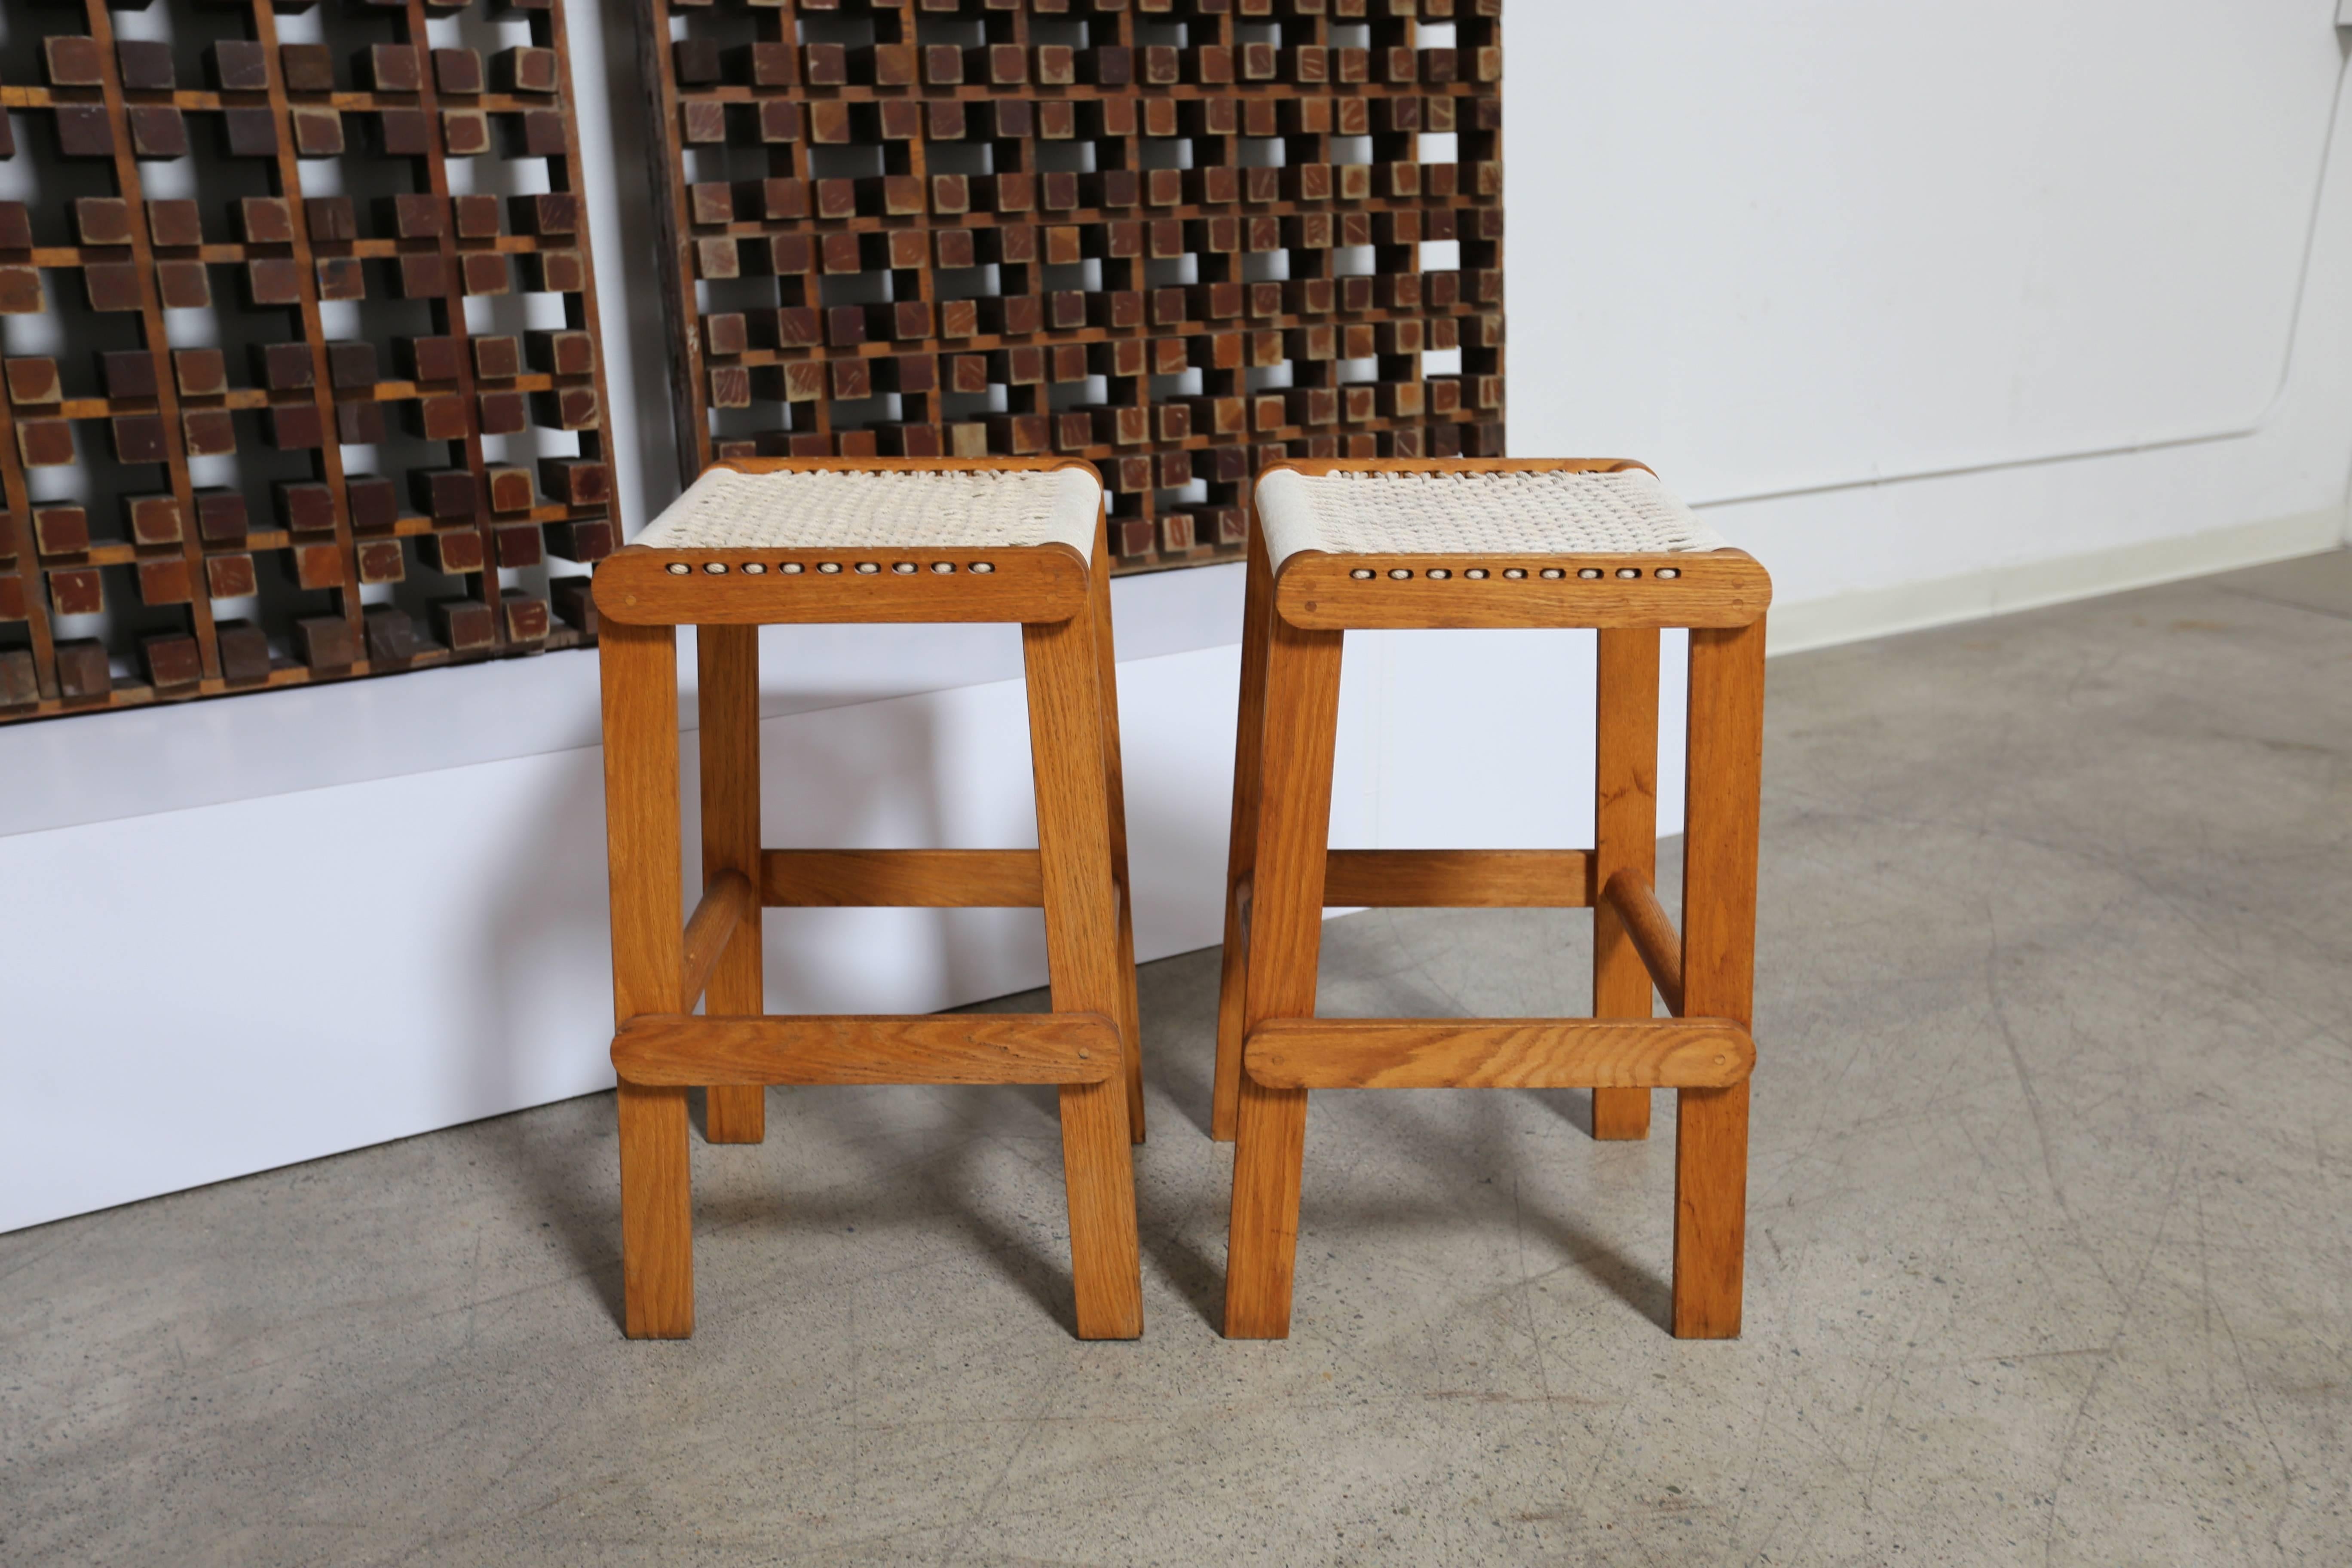 20th Century Pair of Studio Crafted Oak and Rope Stools